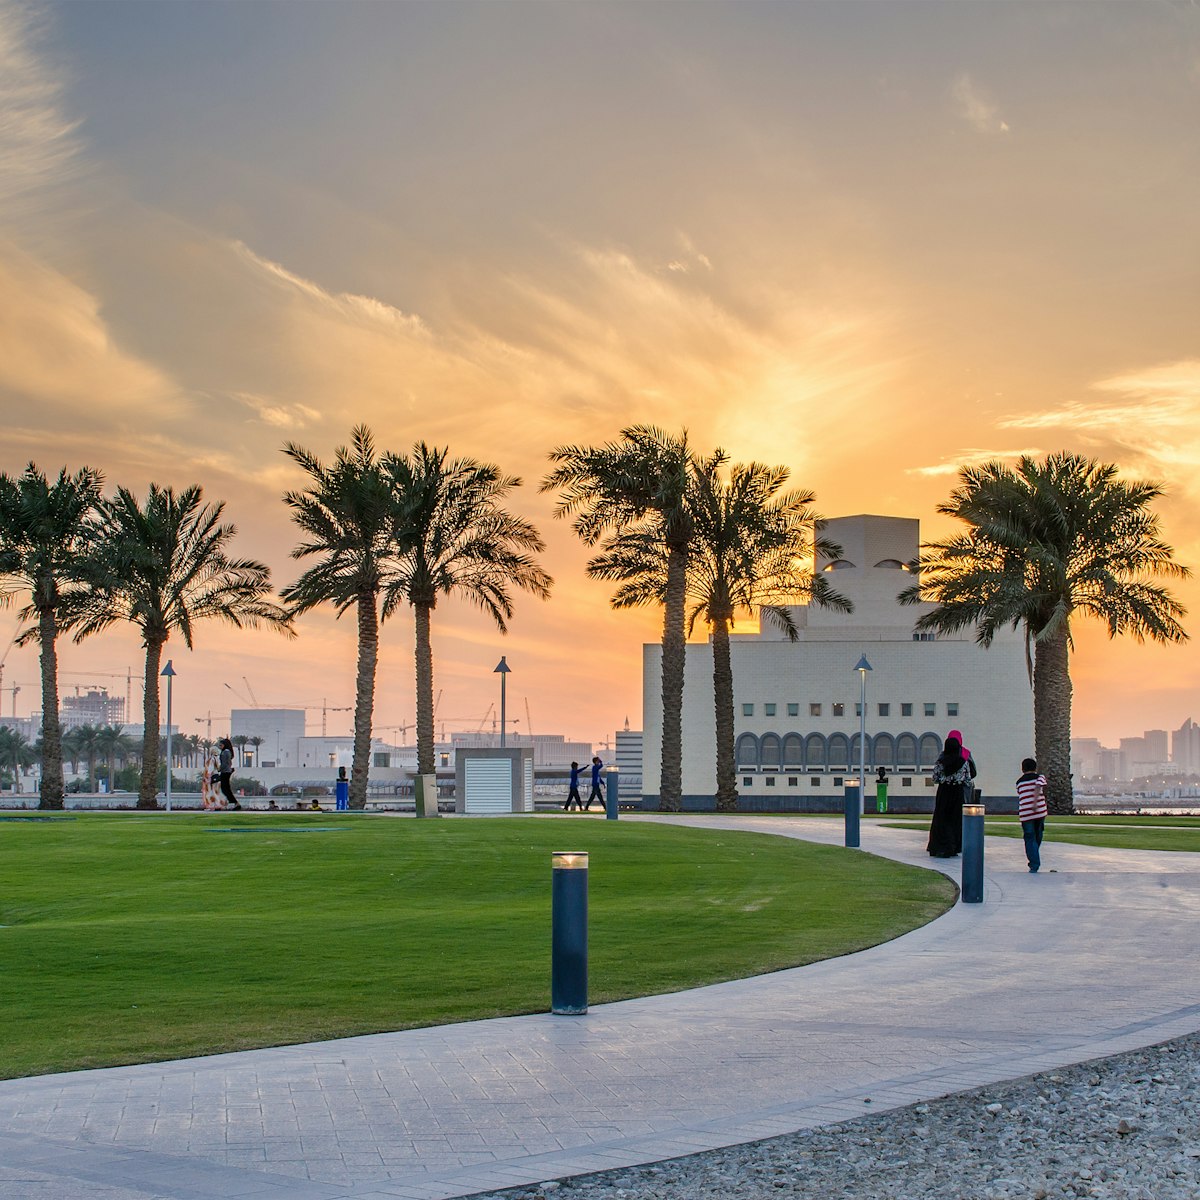 DOHA, QATAR - FEB 24: The Museum of Islamic Art Park on February 24, 2015 in Doha, Qatar.; Shutterstock ID 255551665; Your name (First / Last): Lauren Keith; GL account no.: 65050; Netsuite department name: Online Editorial; Full Product or Project name including edition: Destination page image update